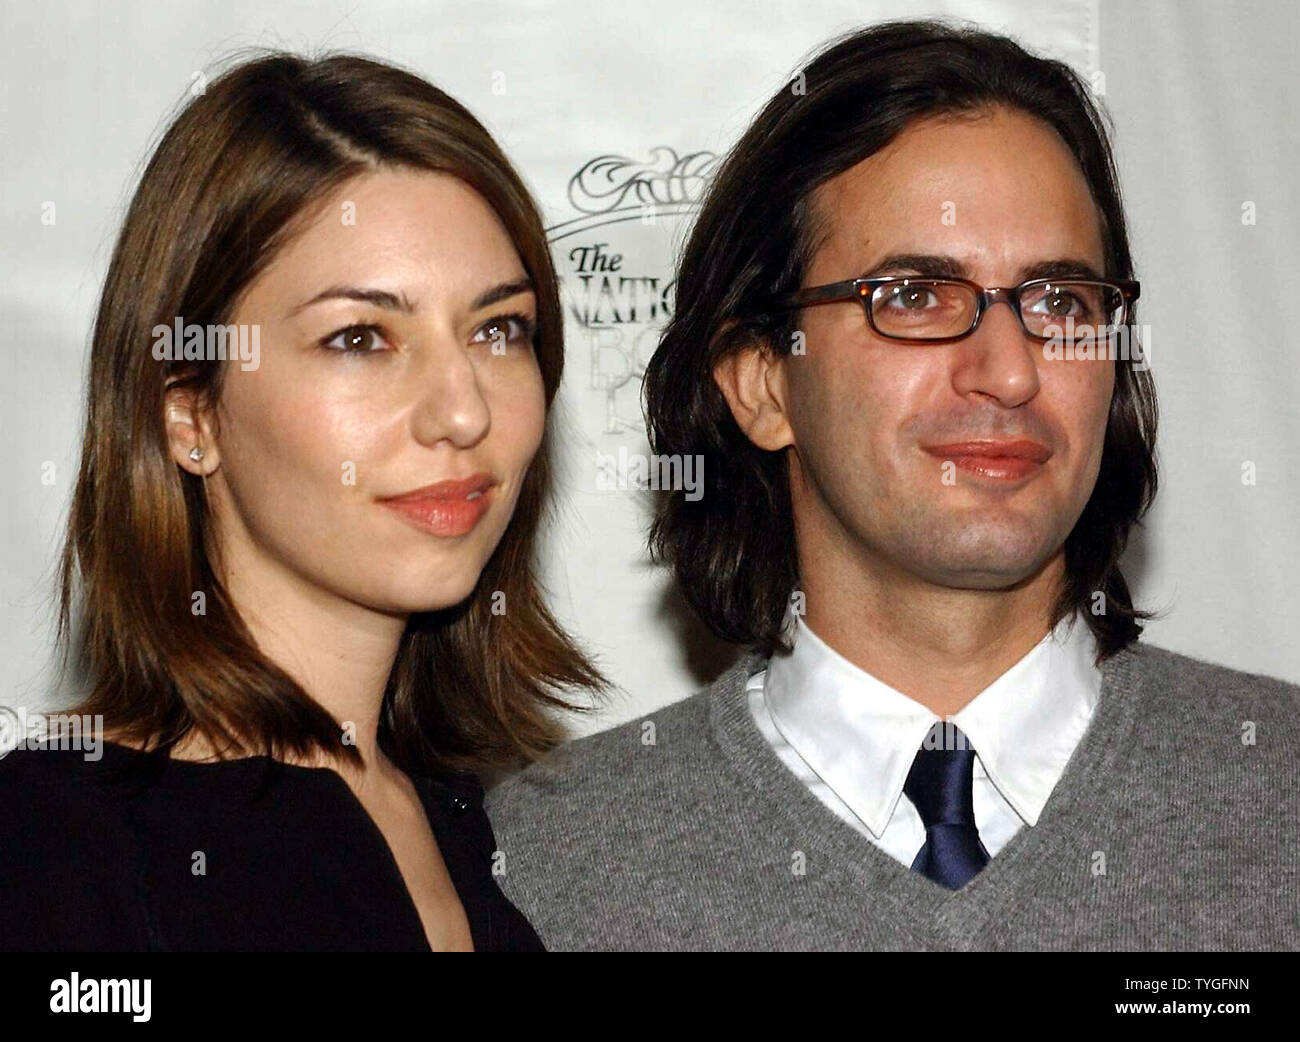 Photos and Pictures - NYC 04/18/10 EXCLUSIVE: Sofia Coppola